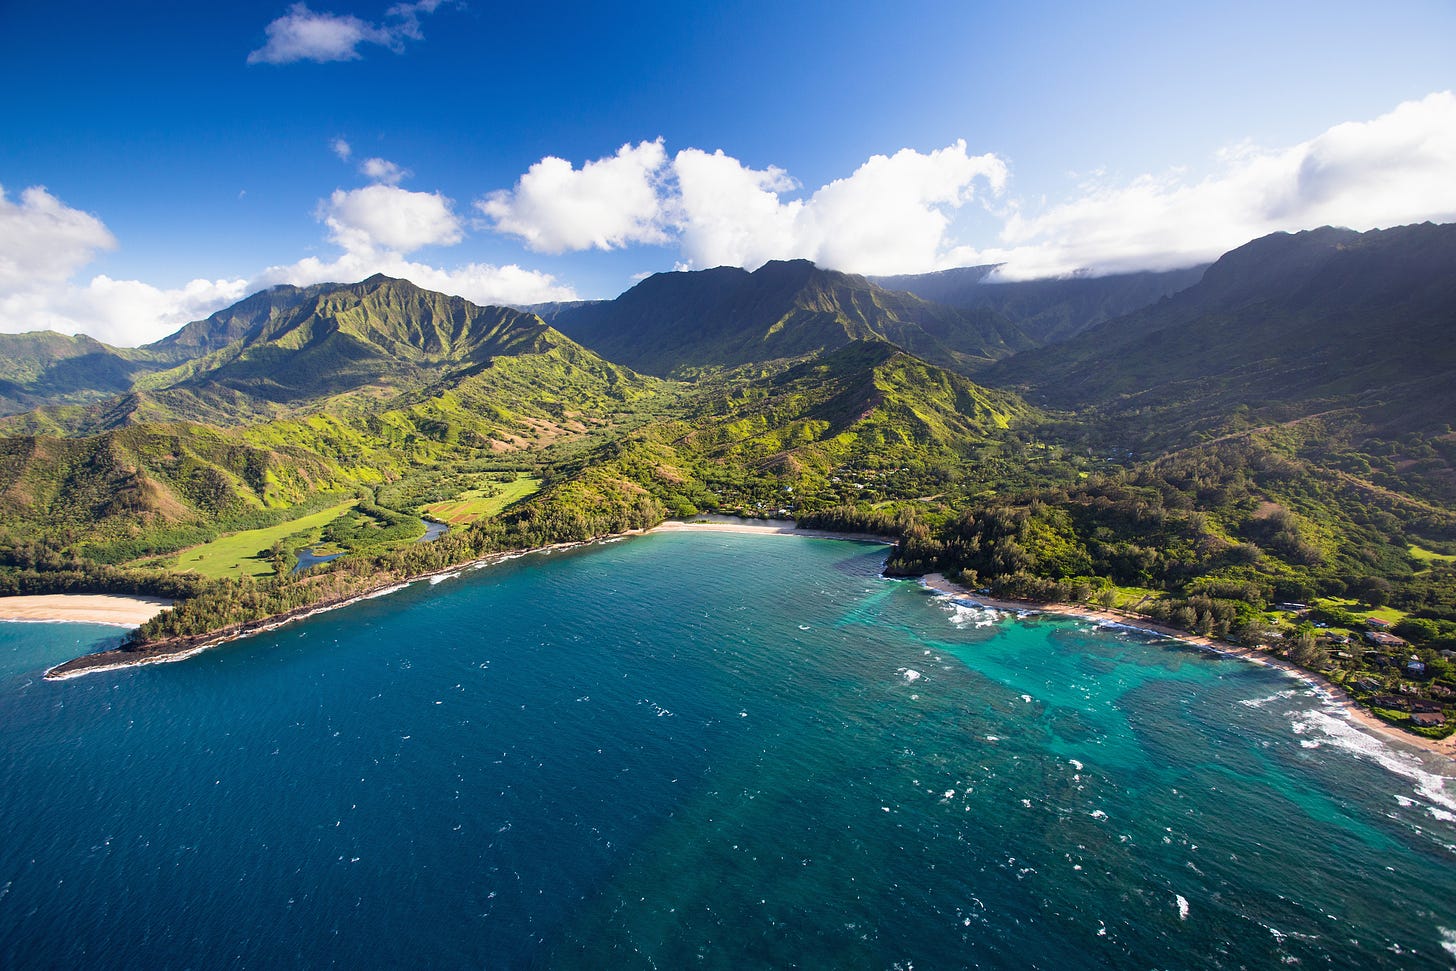 A picture of a blue water bay surrounded by lush green mountains in Hawaii